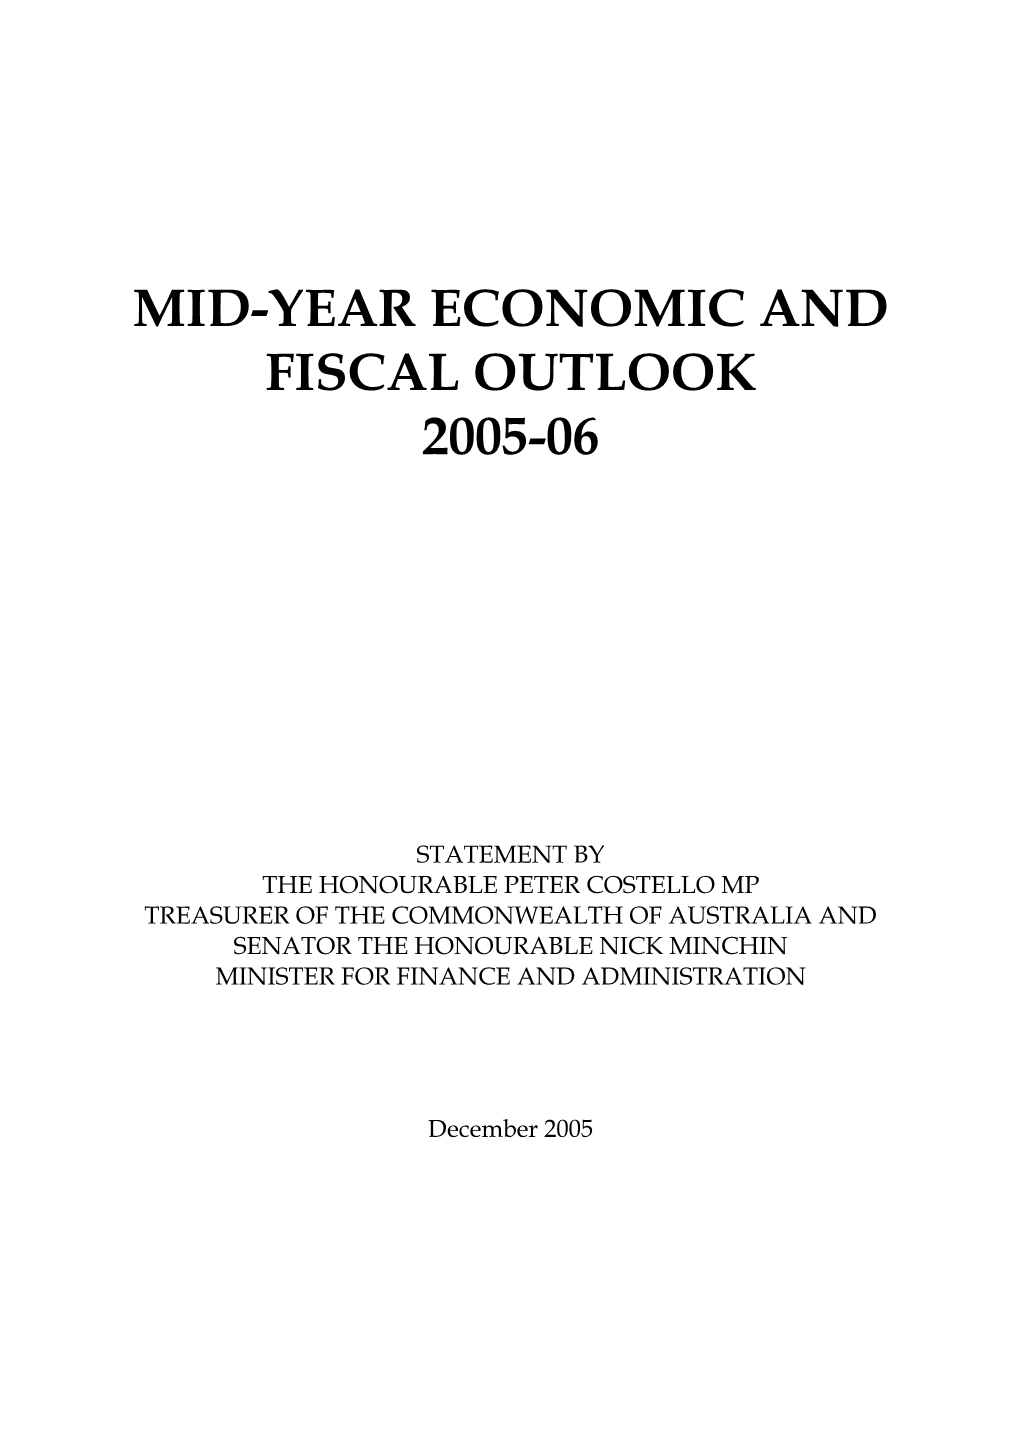 Mid-Year Economic and Fiscal Outlook 2005-06